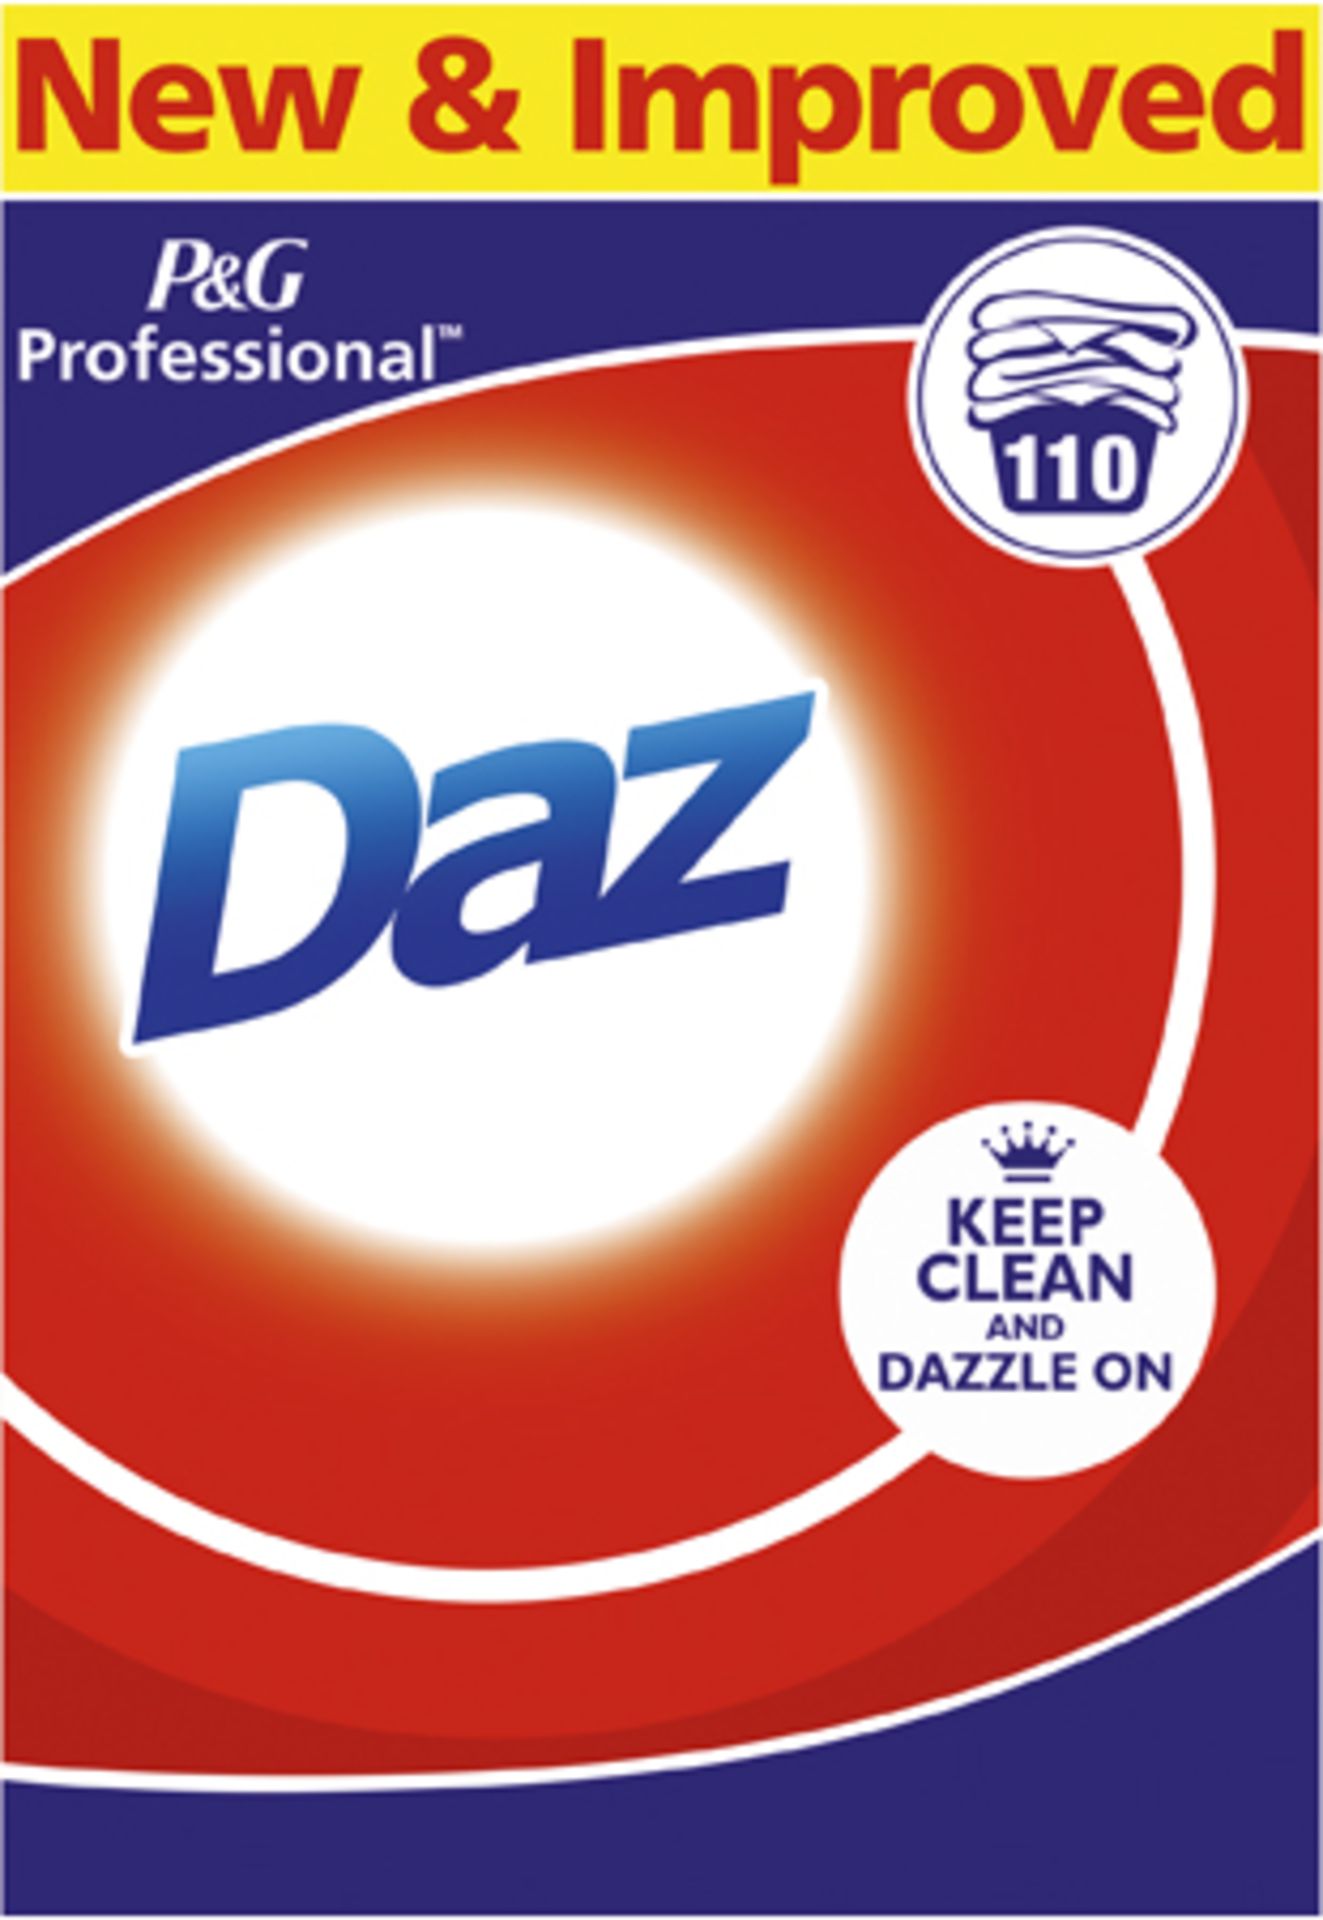 Daz Prof Regular Powder 110 Wash x 20, Postage available by ParcelForce Express 48 £24.99